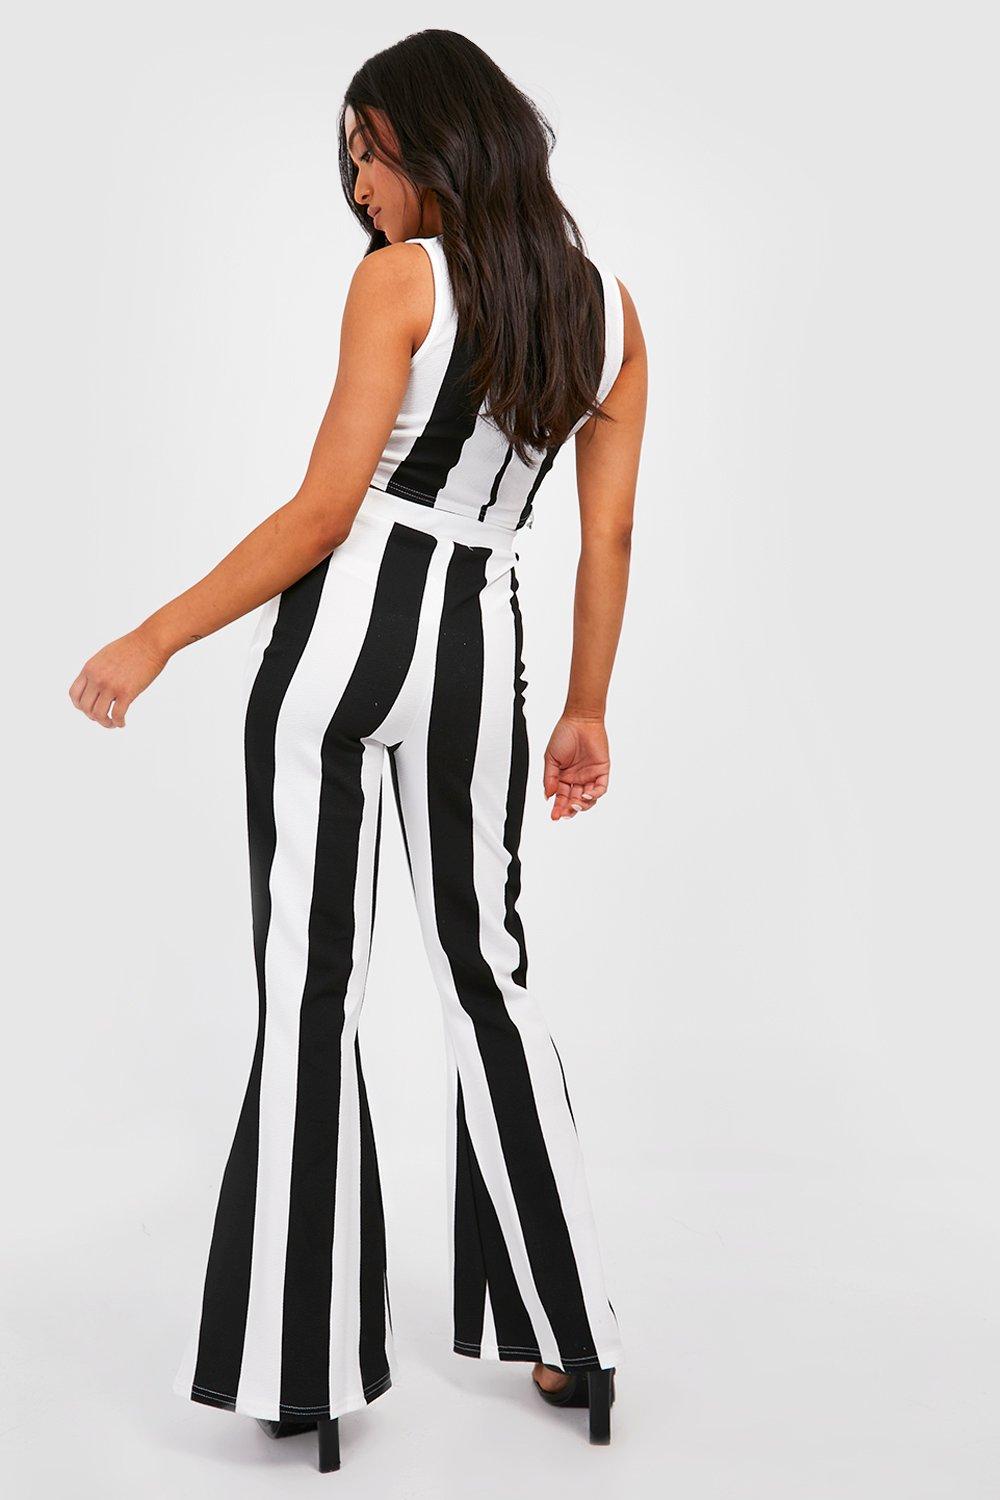 Petite Racer Monochrome Top And Flare Two-Piece